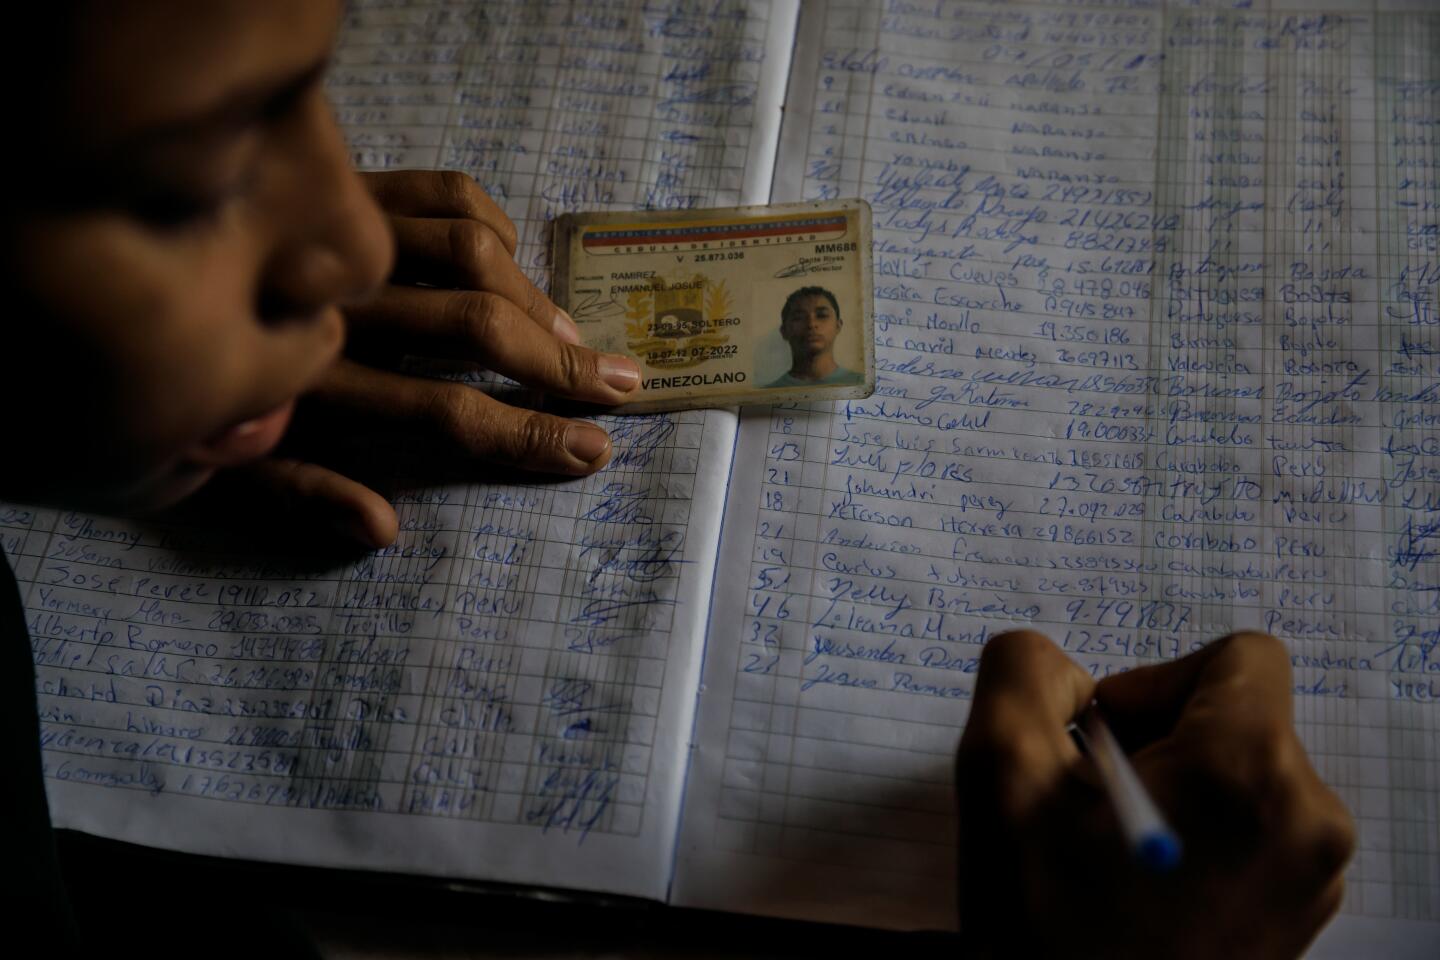 A volunteer documents the names of migrants passing through a shelter.